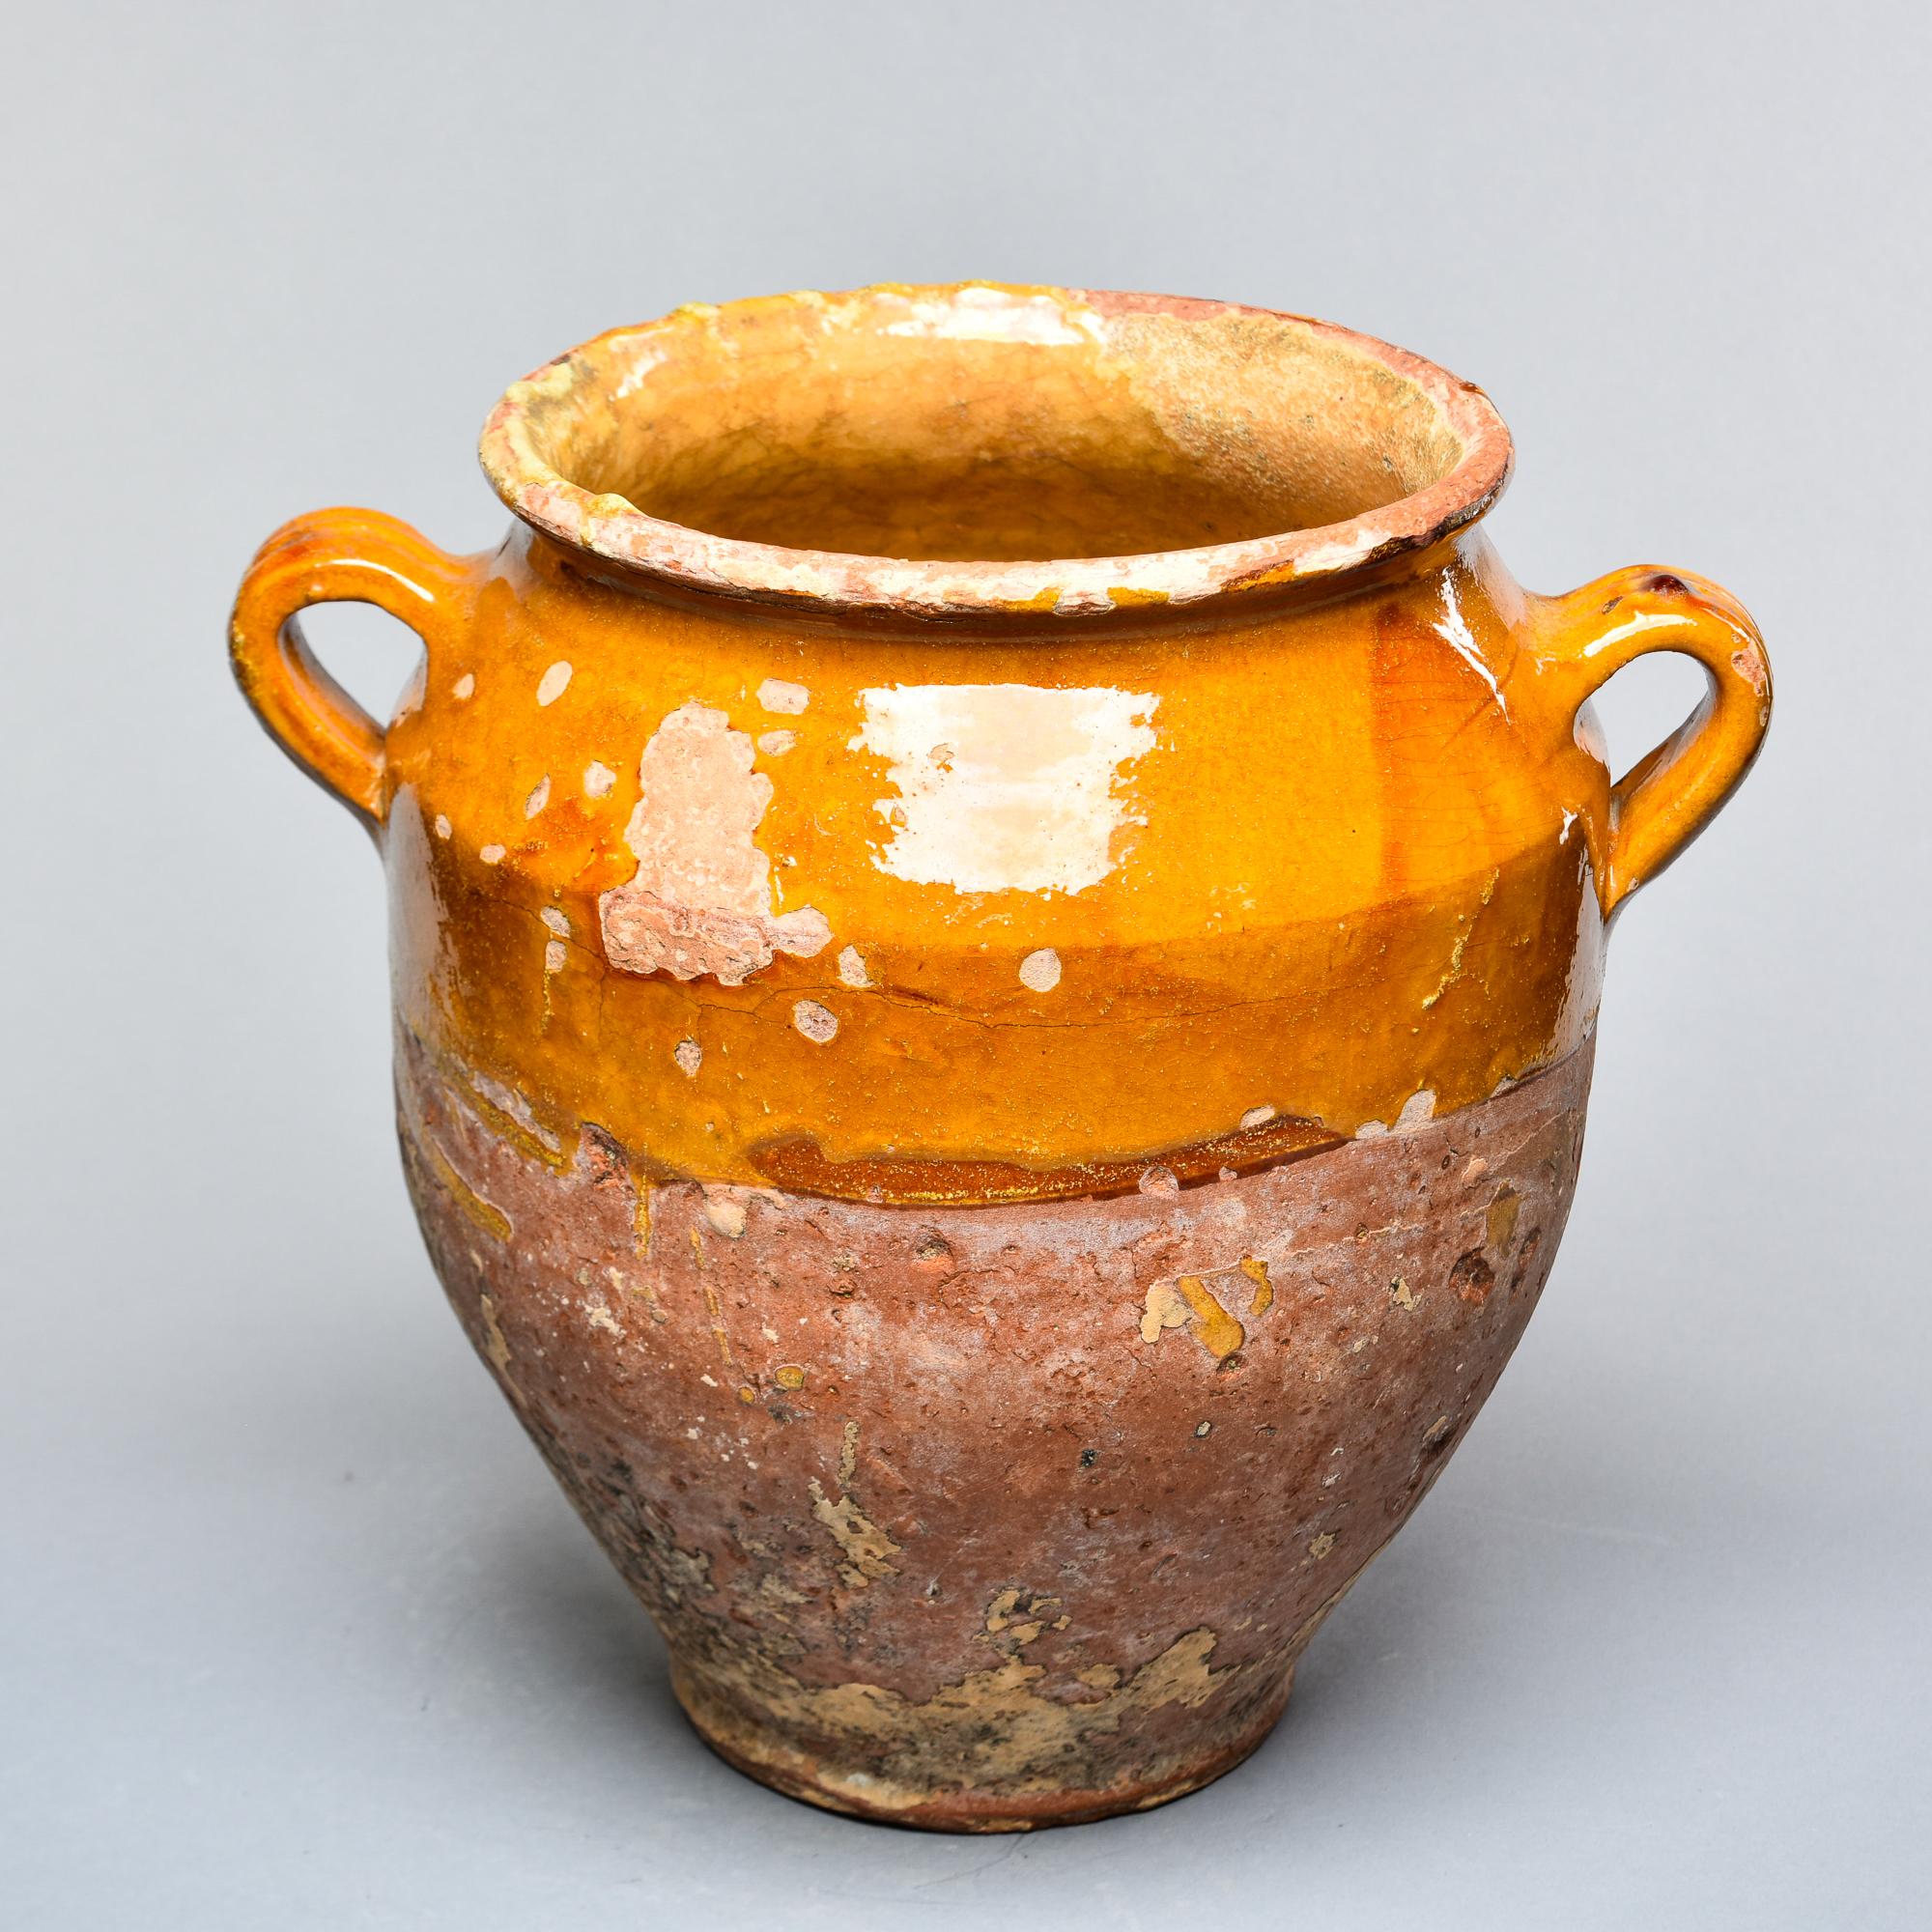 Found in France, this French confit jar dates from approximately 1915. This piece stands 11.75” high and has the traditional form with a wide vessel body and two handles on the sides with a dark mustard-colored glaze on the outside top half and